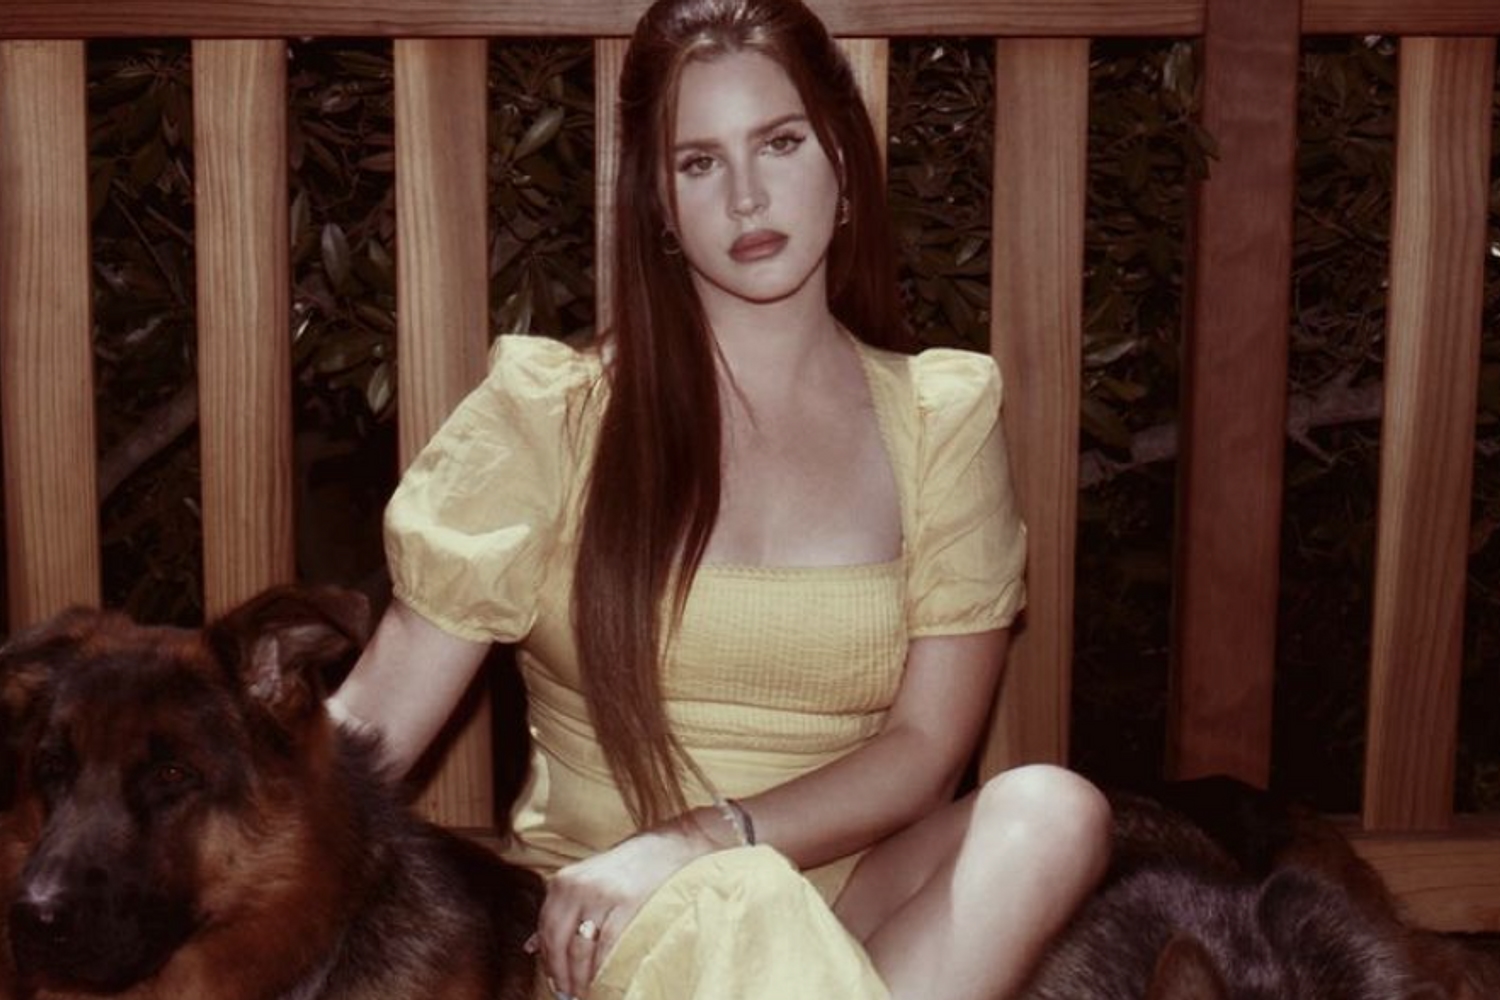 Lana Del Rey teases new 'Blue Banisters' music